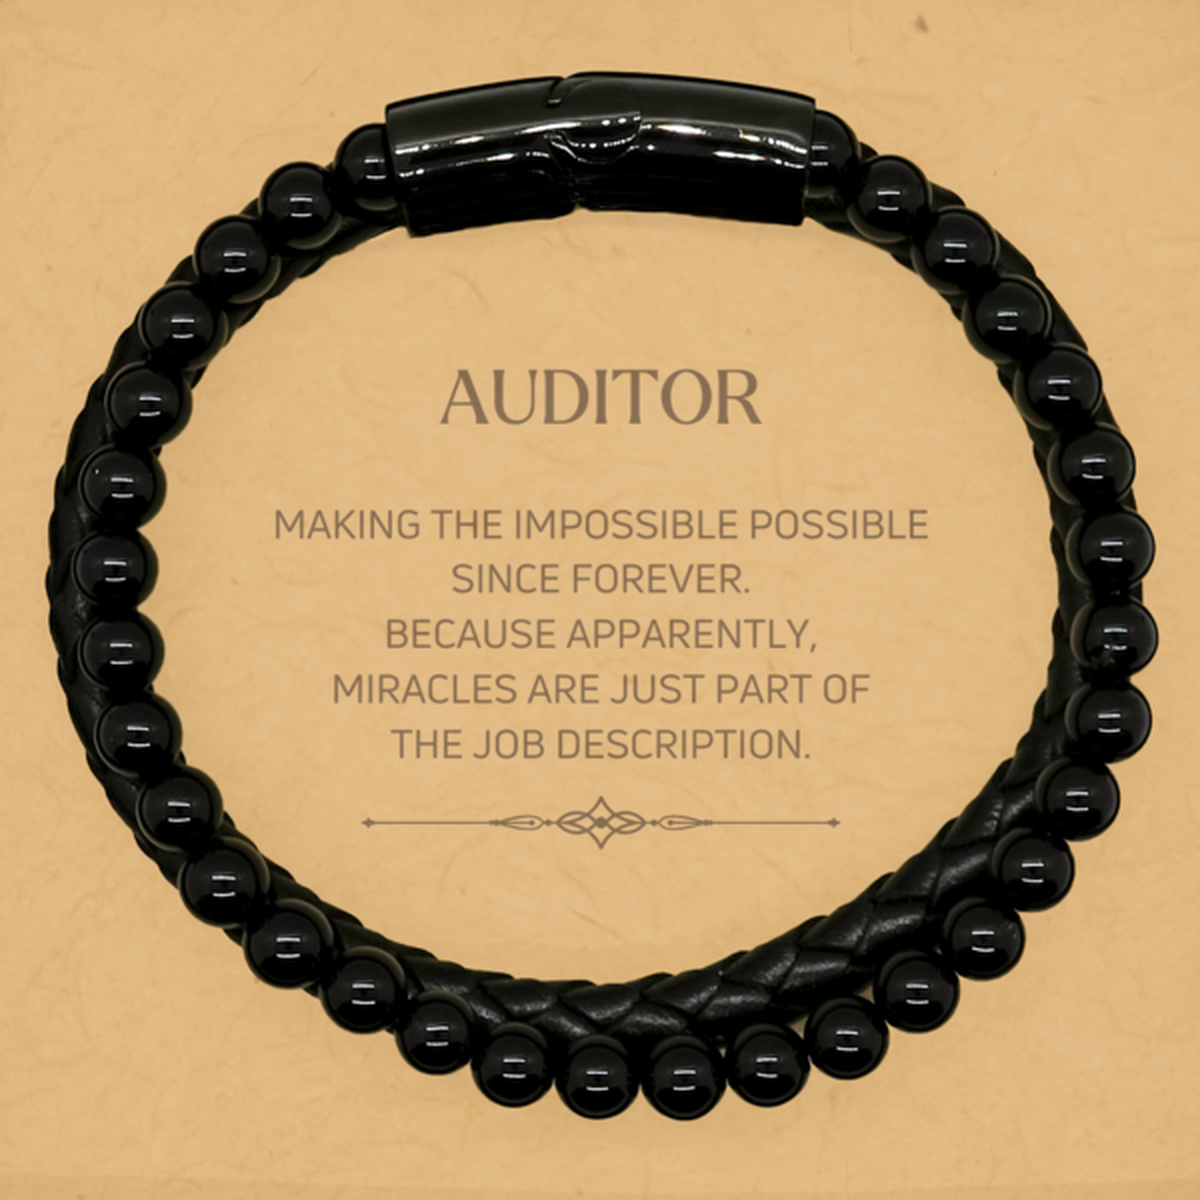 Funny Auditor Gifts, Miracles are just part of the job description, Inspirational Birthday Stone Leather Bracelets For Auditor, Men, Women, Coworkers, Friends, Boss